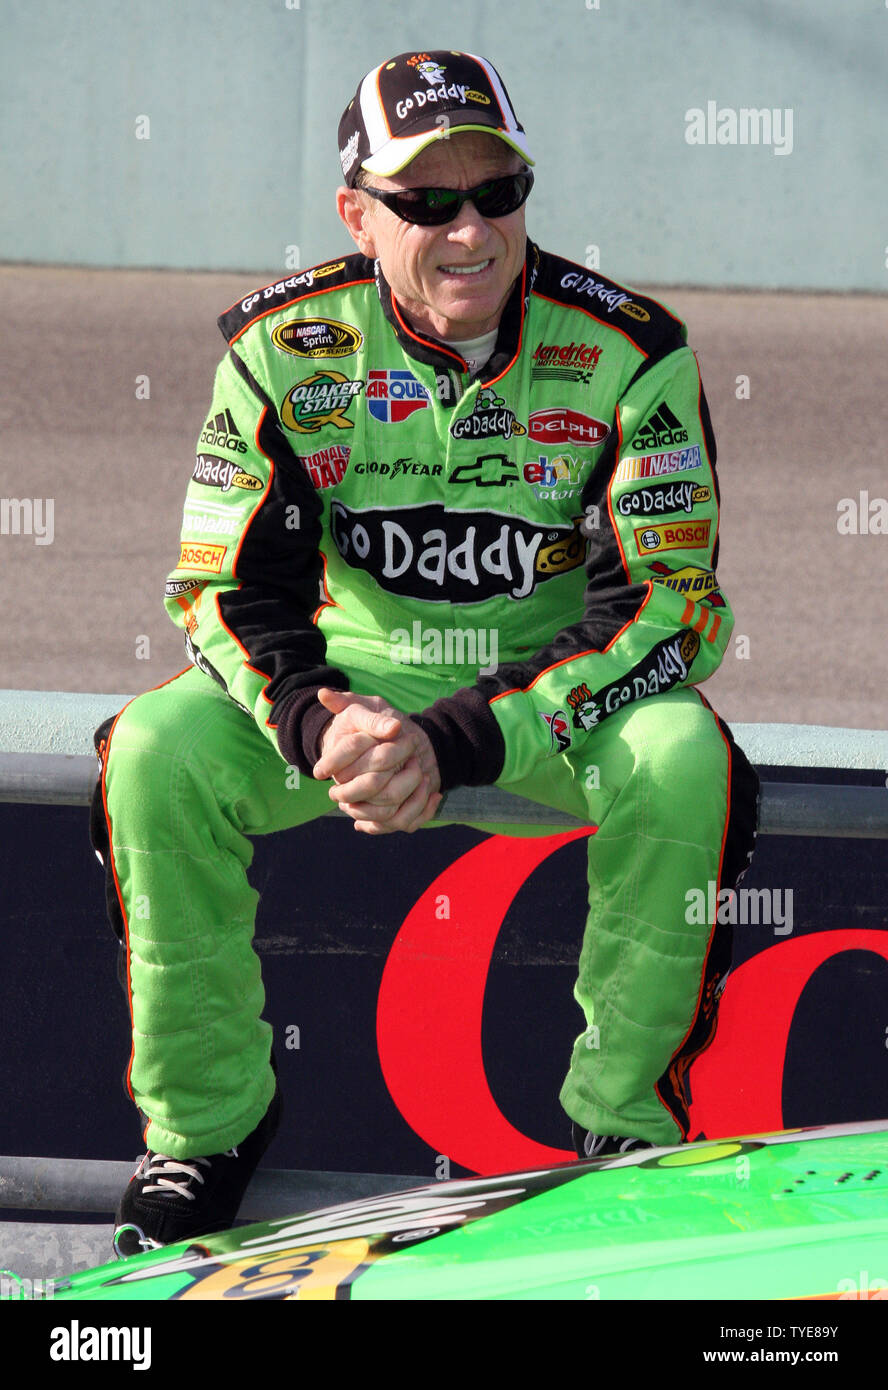 Mark Martin waits on pit road for his turn to qualify for the NASCAR Sprint Cup Ford 400 at Homestead-Miami Speedway in Homestead, Florida on November 19, 2010.  UPI/Malcolm Hope Stock Photo